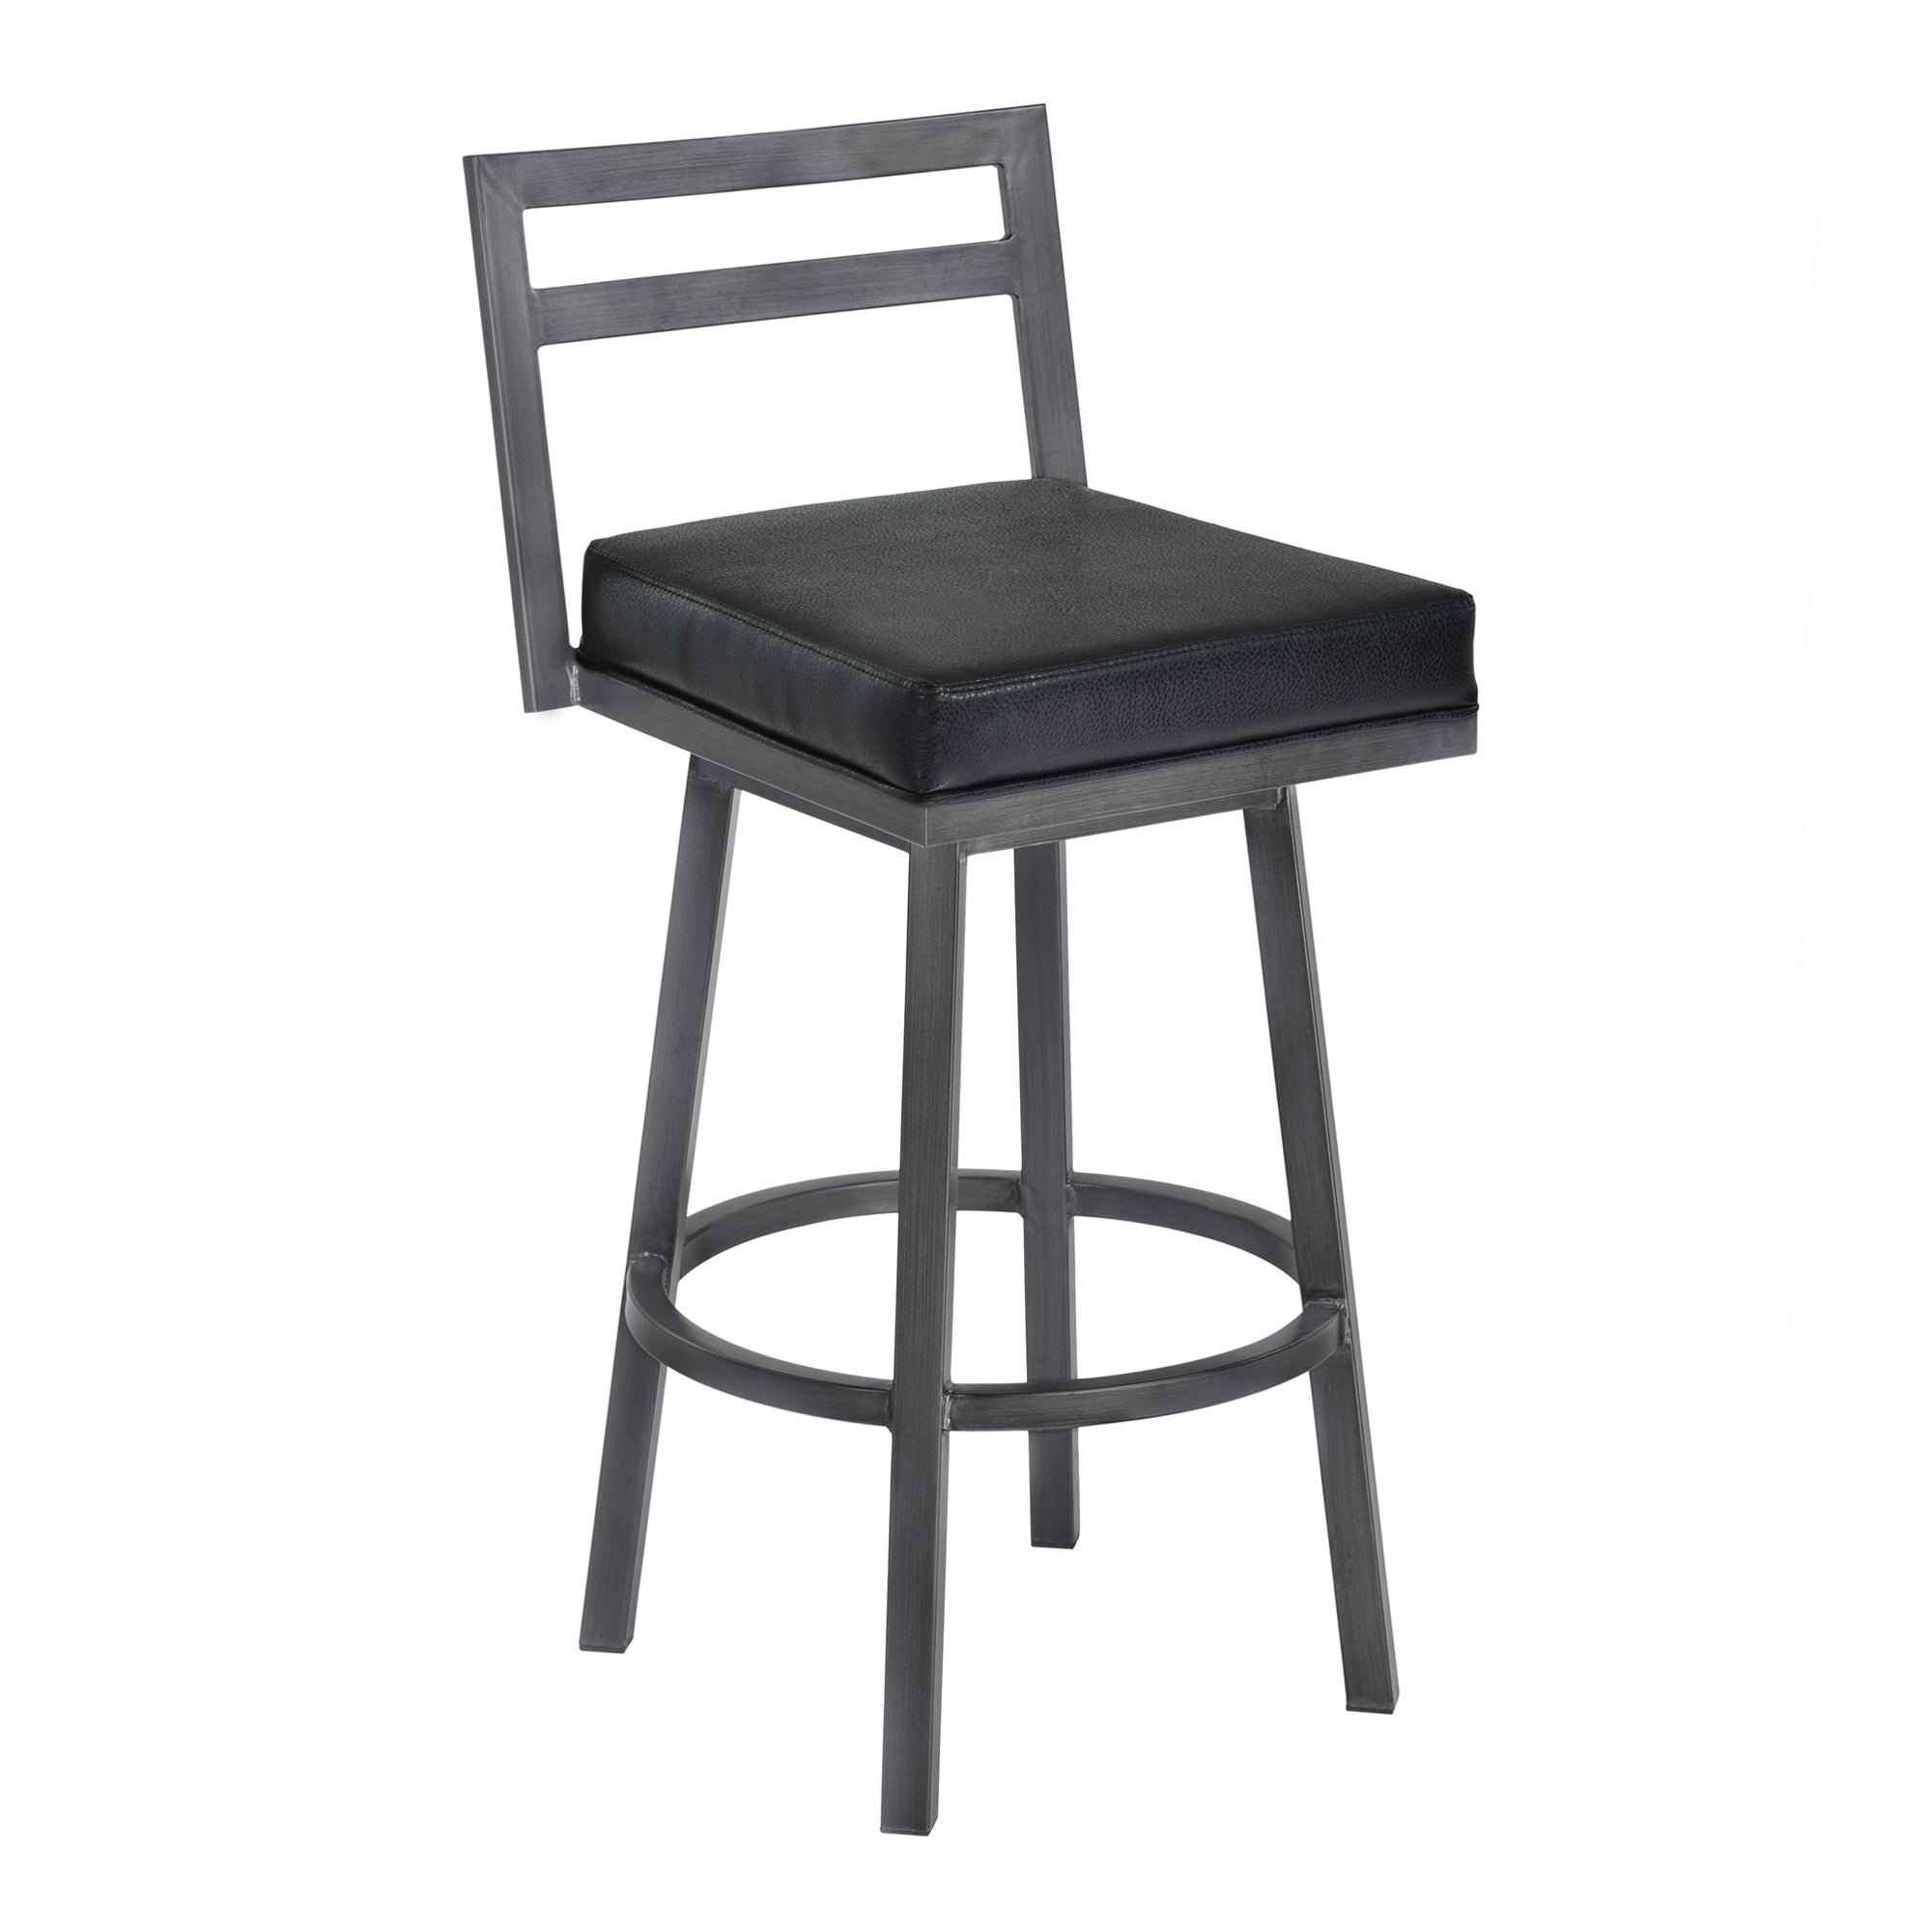 Armen Living Lcmobamfbl26 Moniq 26" Counter Height Metal Swivel Barstool In Ford Black Faux Leather And Mineral Finish